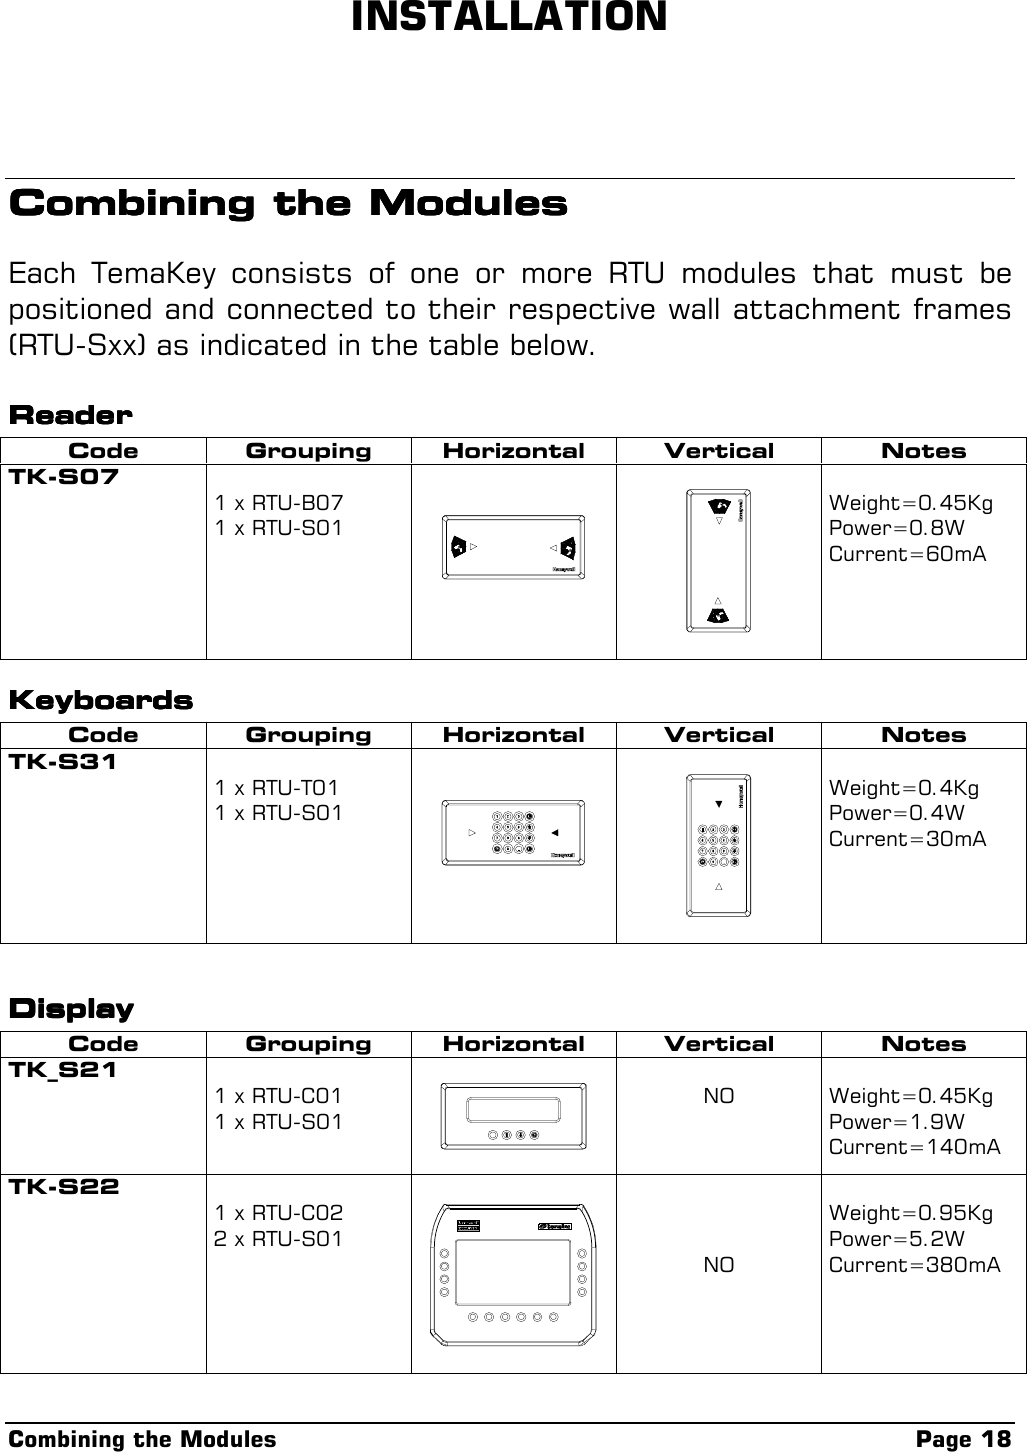 Combining the Modules Page 18INSTALLATIONCombining the ModulesCombining the ModulesCombining the ModulesCombining the ModulesEach TemaKey consists of one or more RTU modules that must bepositioned and connected to their respective wall attachment frames(RTU-Sxx) as indicated in the table below.ReaderReaderReaderReaderCode Grouping Horizontal Vertical NotesTK-S071 x RTU-B071 x RTU-S01Weight=0.45KgPower=0.8WCurrent=60mAKeyboardsKeyboardsKeyboardsKeyboardsCode Grouping Horizontal Vertical NotesTK-S311 x RTU-T011 x RTU-S01Weight=0.4KgPower=0.4WCurrent=30mADisplayDisplayDisplayDisplayCode Grouping Horizontal Vertical NotesTK_S211 x RTU-C011 x RTU-S01NO Weight=0.45KgPower=1.9WCurrent=140mATK-S221 x RTU-C022 x RTU-S01NOWeight=0.95KgPower=5.2WCurrent=380mA